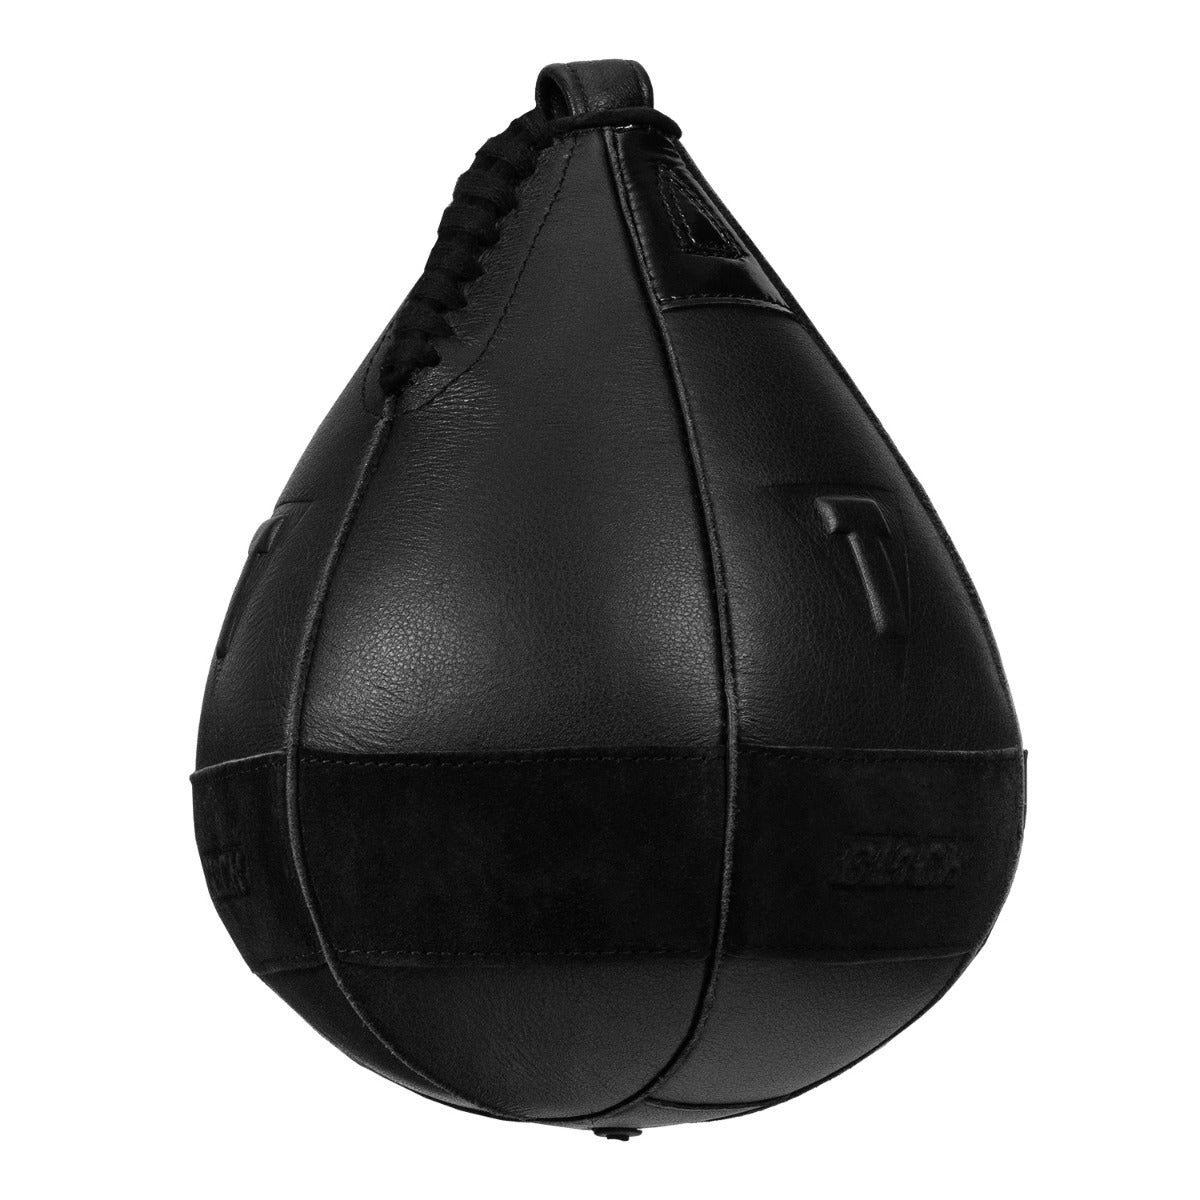 TITLE BLACK Speed Bag 2.0 | TITLE Boxing Gear